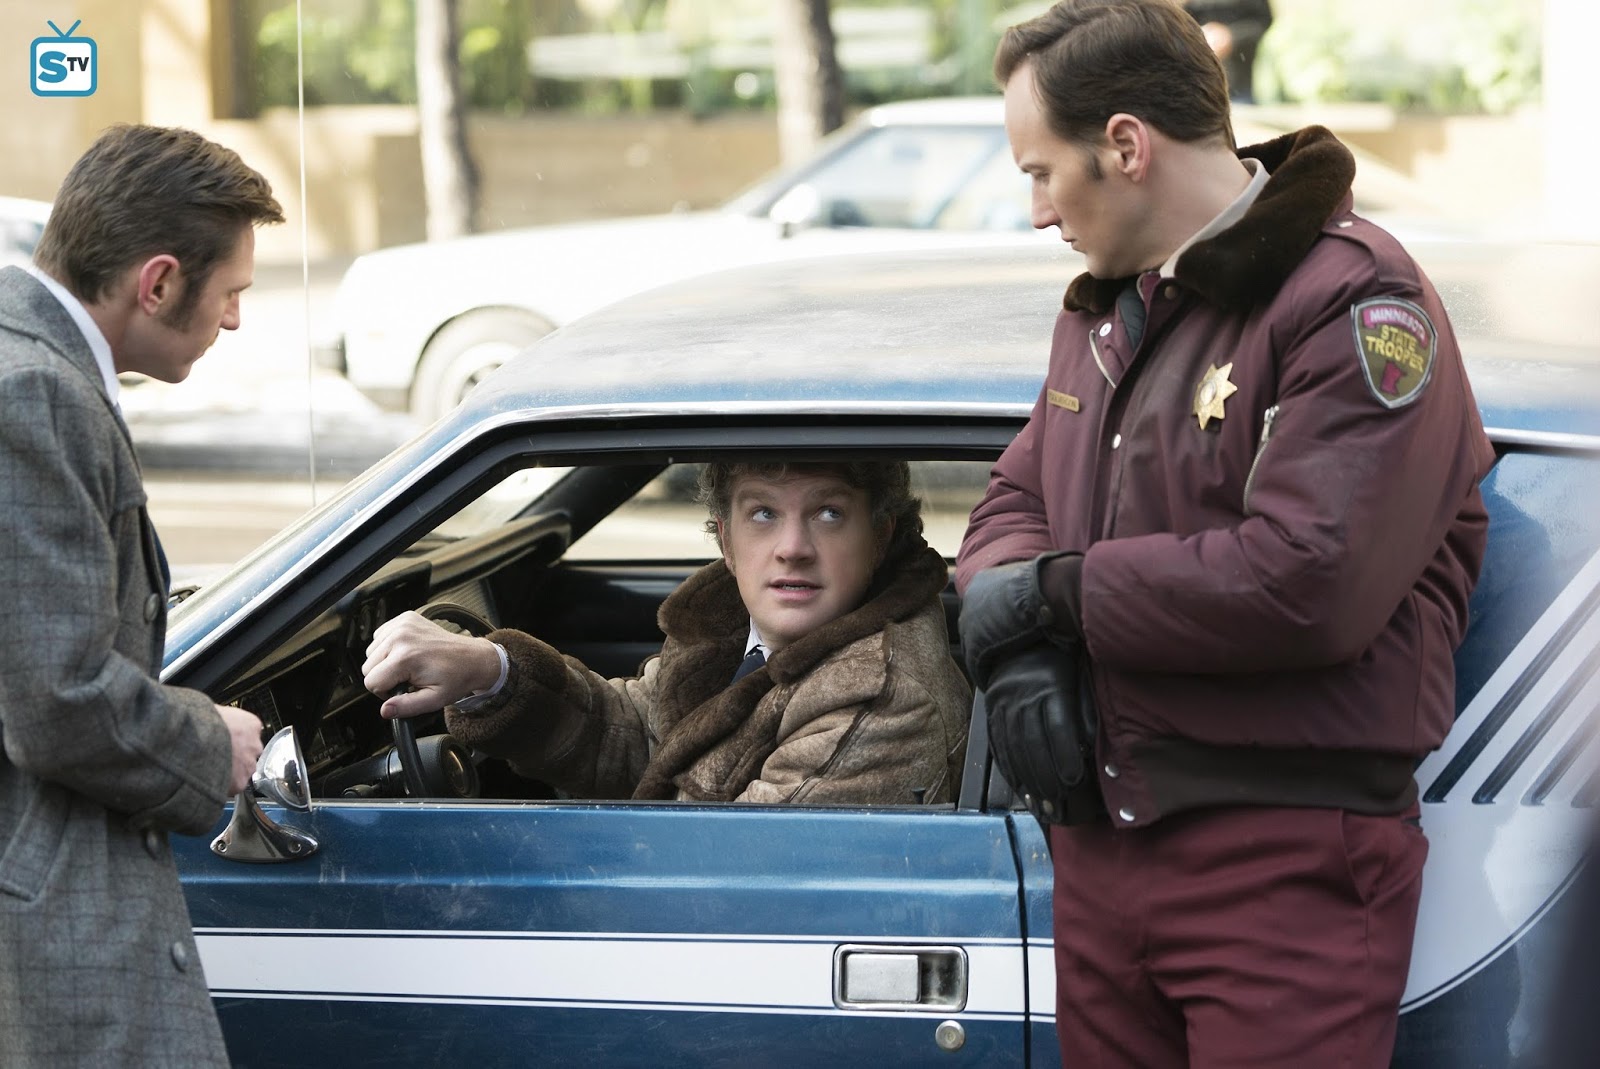 Fargo – Chapter 3, “The Myth of Sisyphus” – Advance Preview